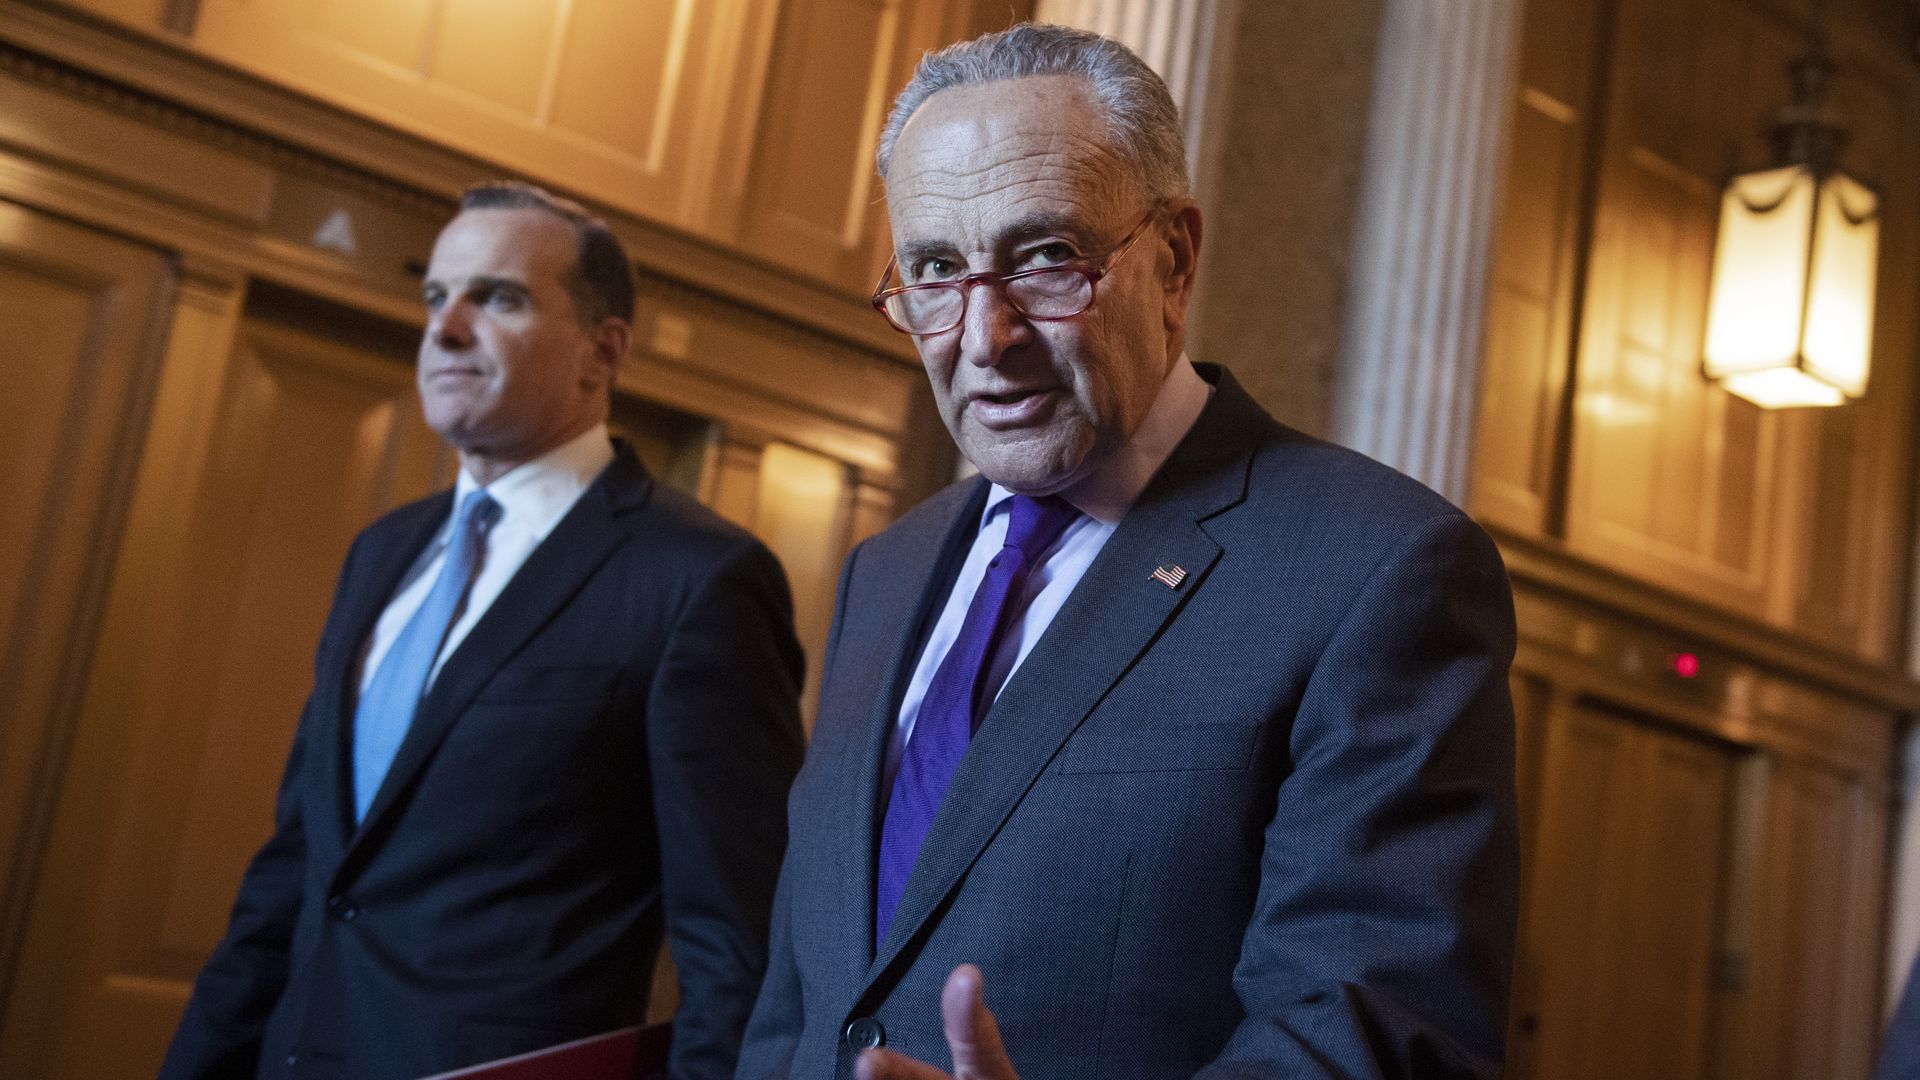 In this image, Schumer talks and gestures while wearing a suit and walking down a hallway.